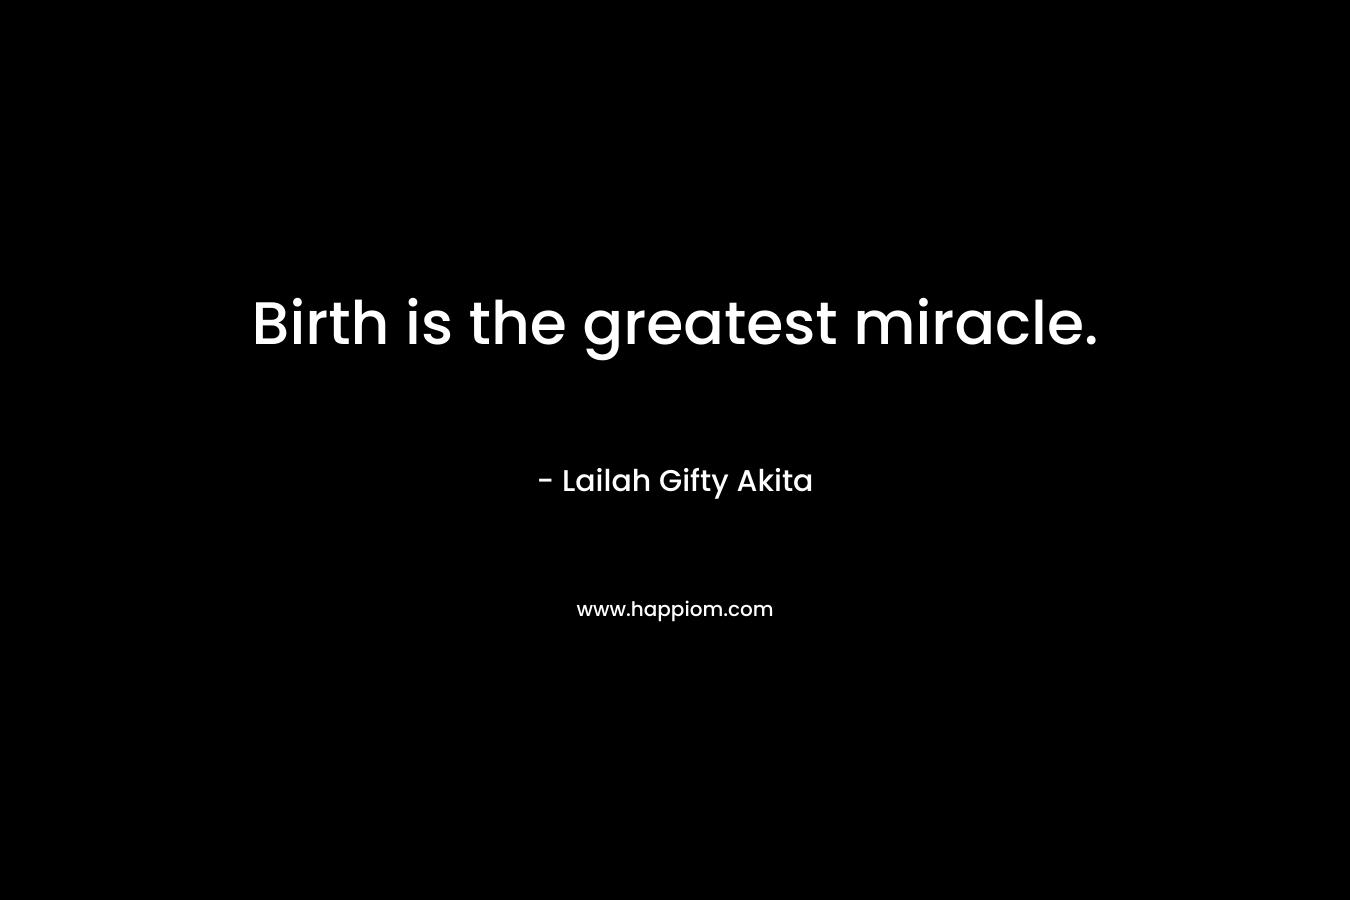 Birth is the greatest miracle.